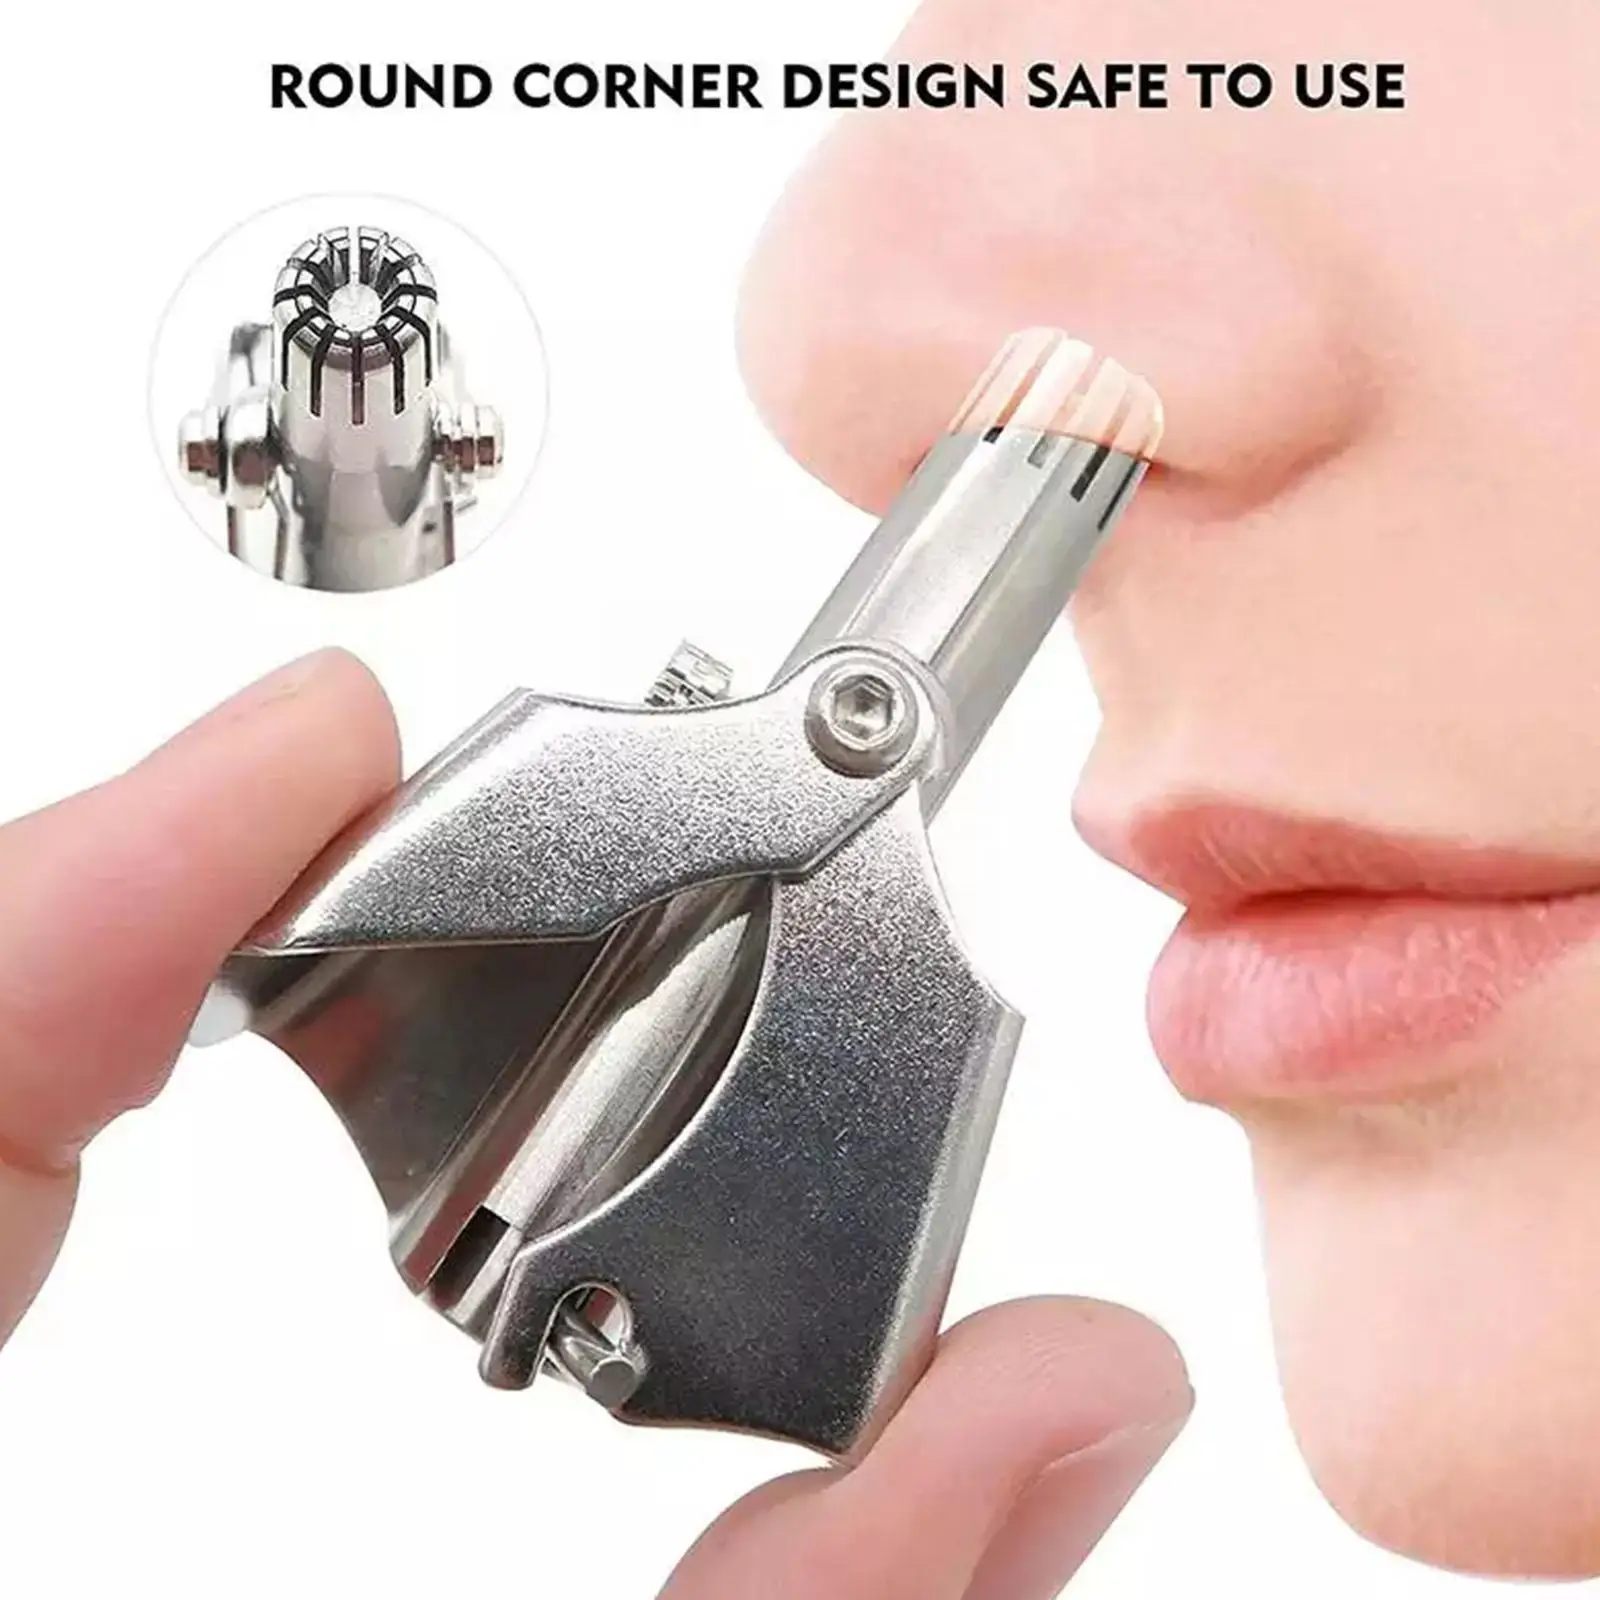 

Nose Trimer For Men Ears Trimmer Ear Hairs Male Epilator Hair Cutter Eyebrows Cleaning Tool Clippers Shaver Beard Haircut B L3p1